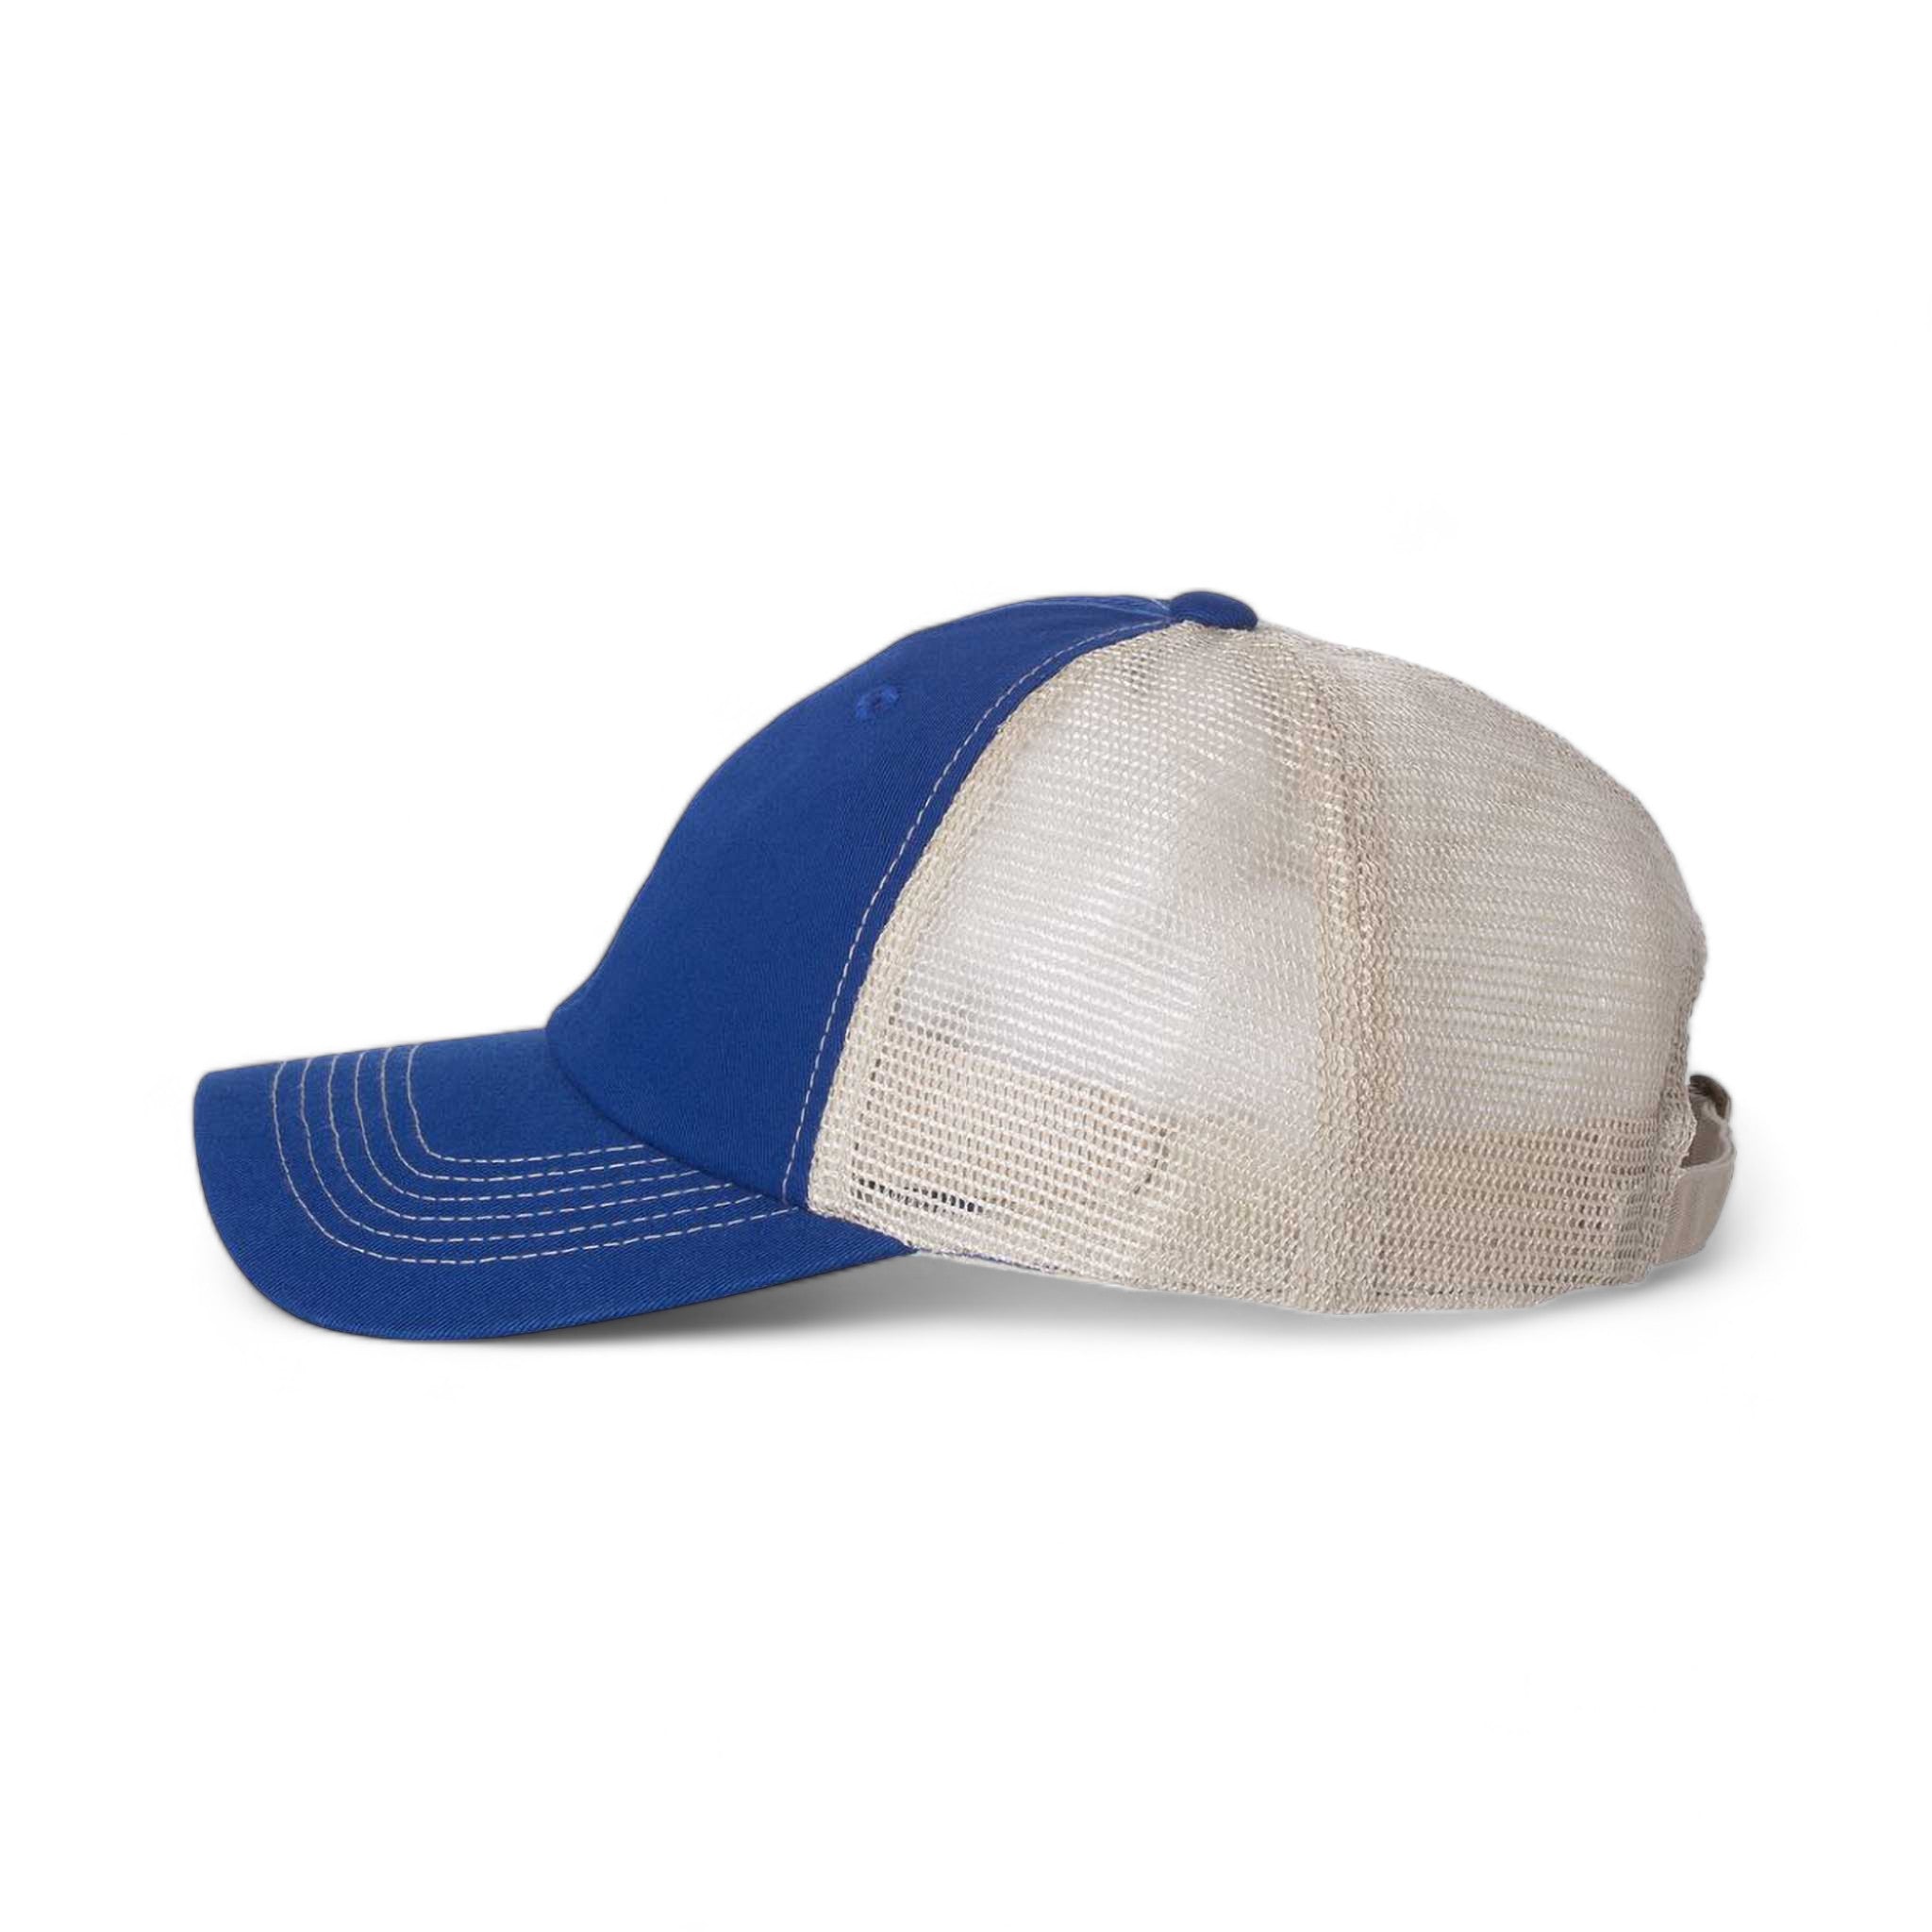 Side view of Sportsman 3100 custom hat in royal and stone